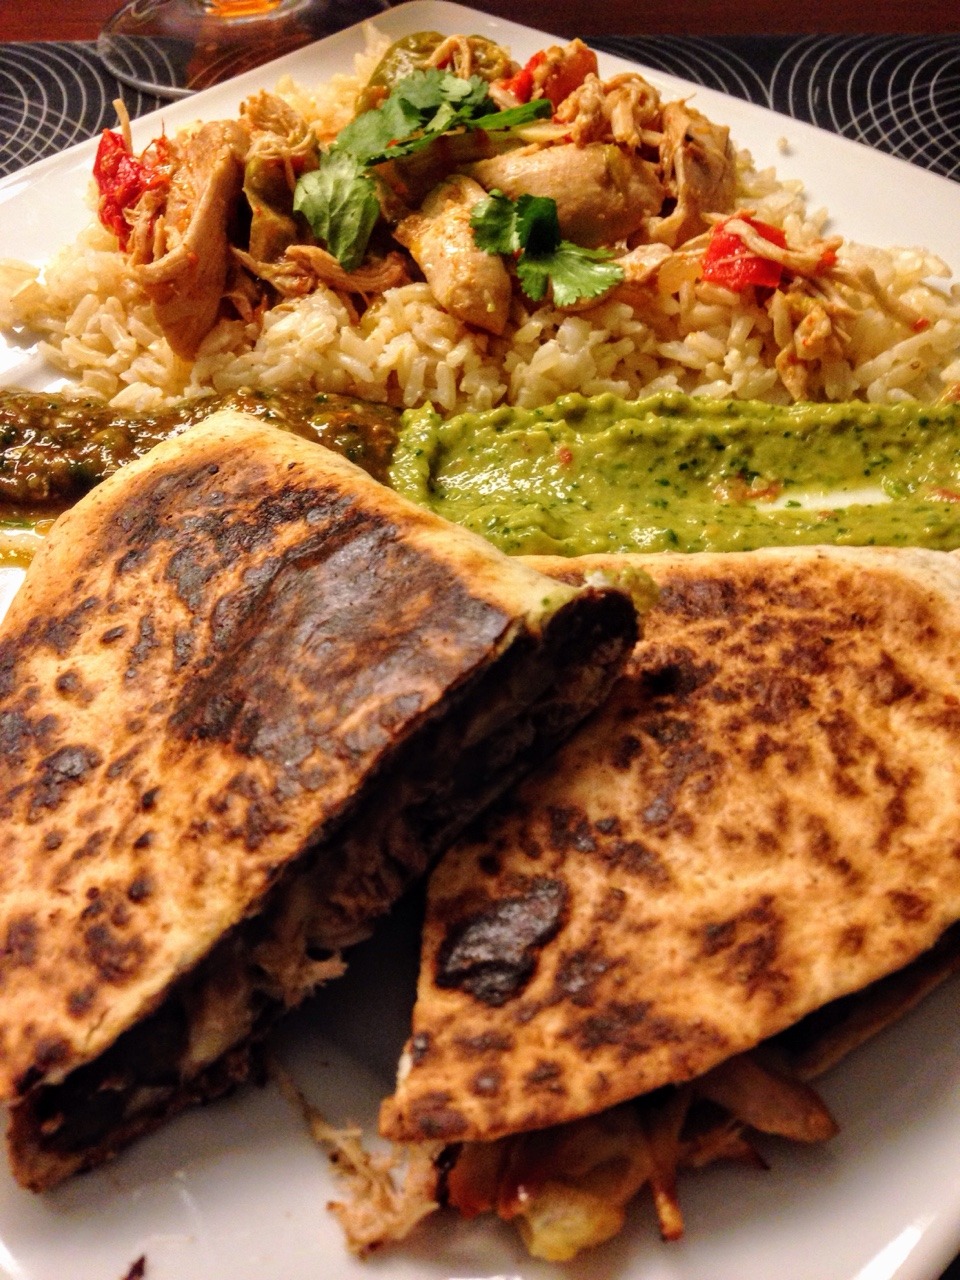 Quesadilla with black beans and cheese, served with brown rice with chicken taco topping, guacamole and jalapeño salsa